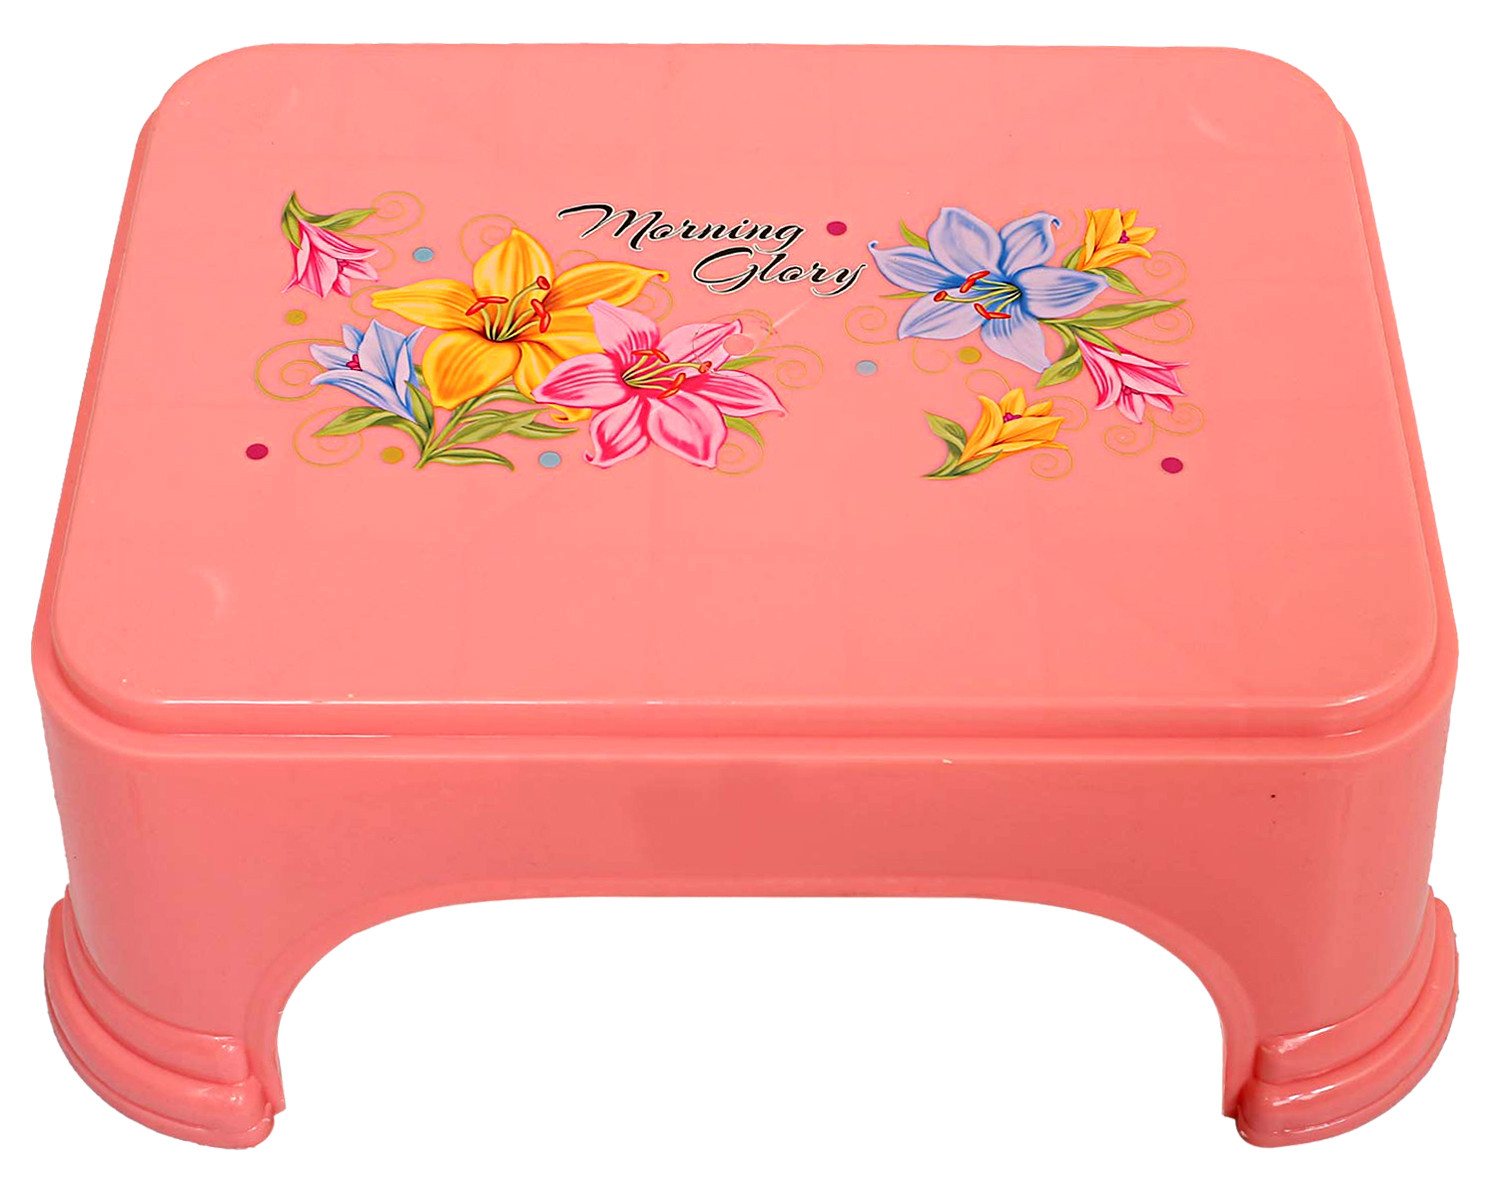 Kuber Industries Floral Print 2 Pieces Plastic Bathroom Stool, Adults Simple Style Stool Anti-Slip with Strong Bearing Stool for Home, Office, Kindergarten, Pink & White